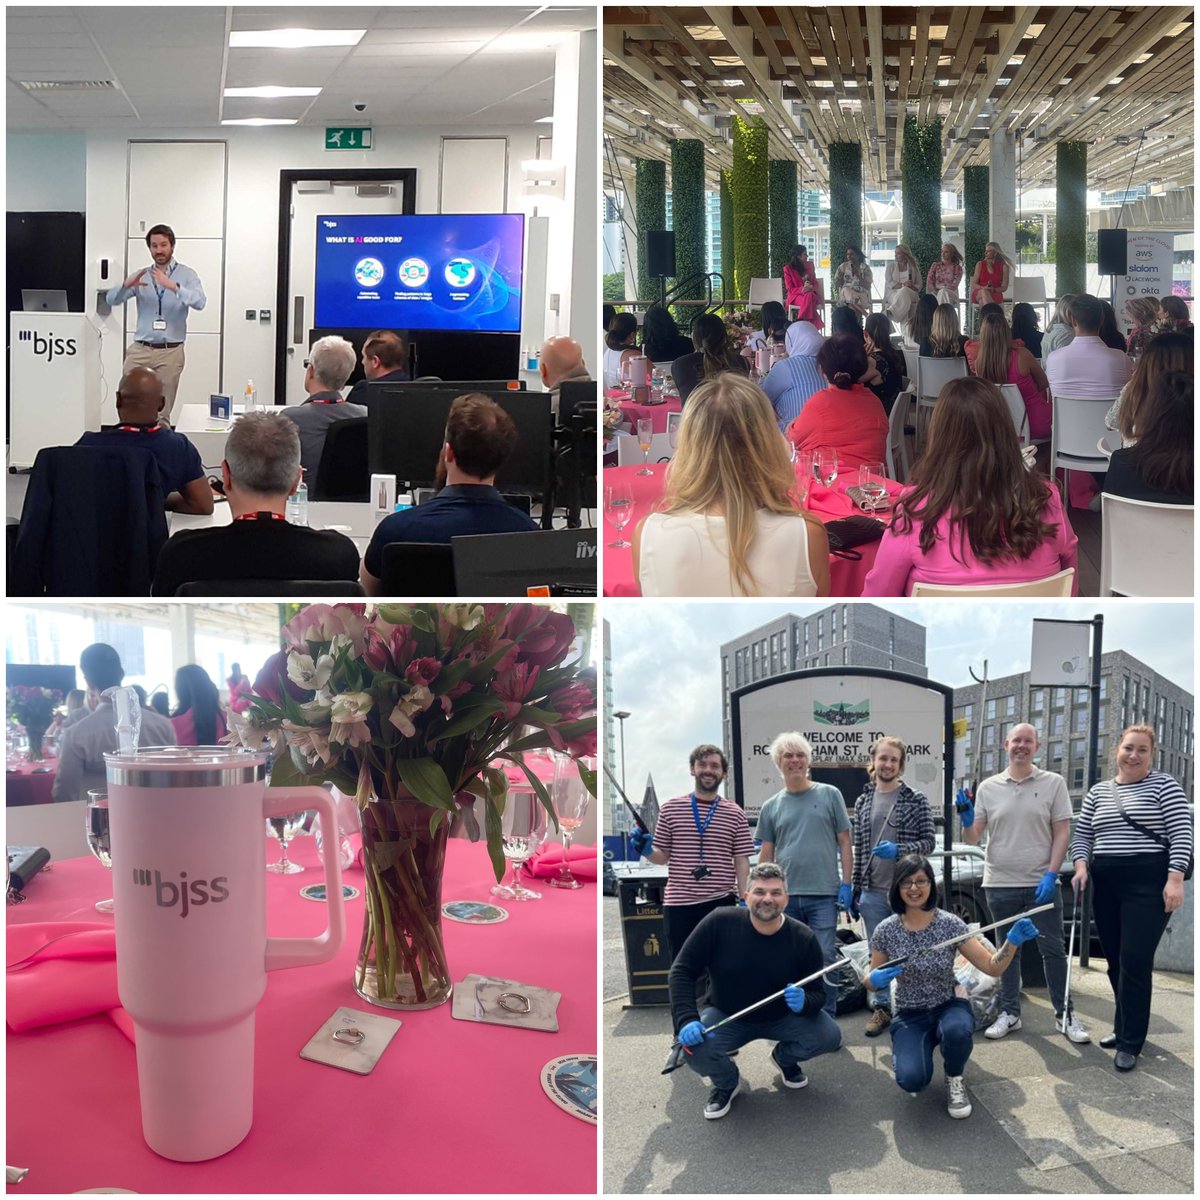 It's been an amazing few weeks at BJSS! 🧡

We've promoted diversity at the AWS Women in Cloud event, held an #EarthDay litter pick in Sheffield, and showcased generative AI with AWS in Leeds!

Apply here: hubs.li/Q02w01yG0

#LifeAtBJSS #DiversityInTech #CareersInTech